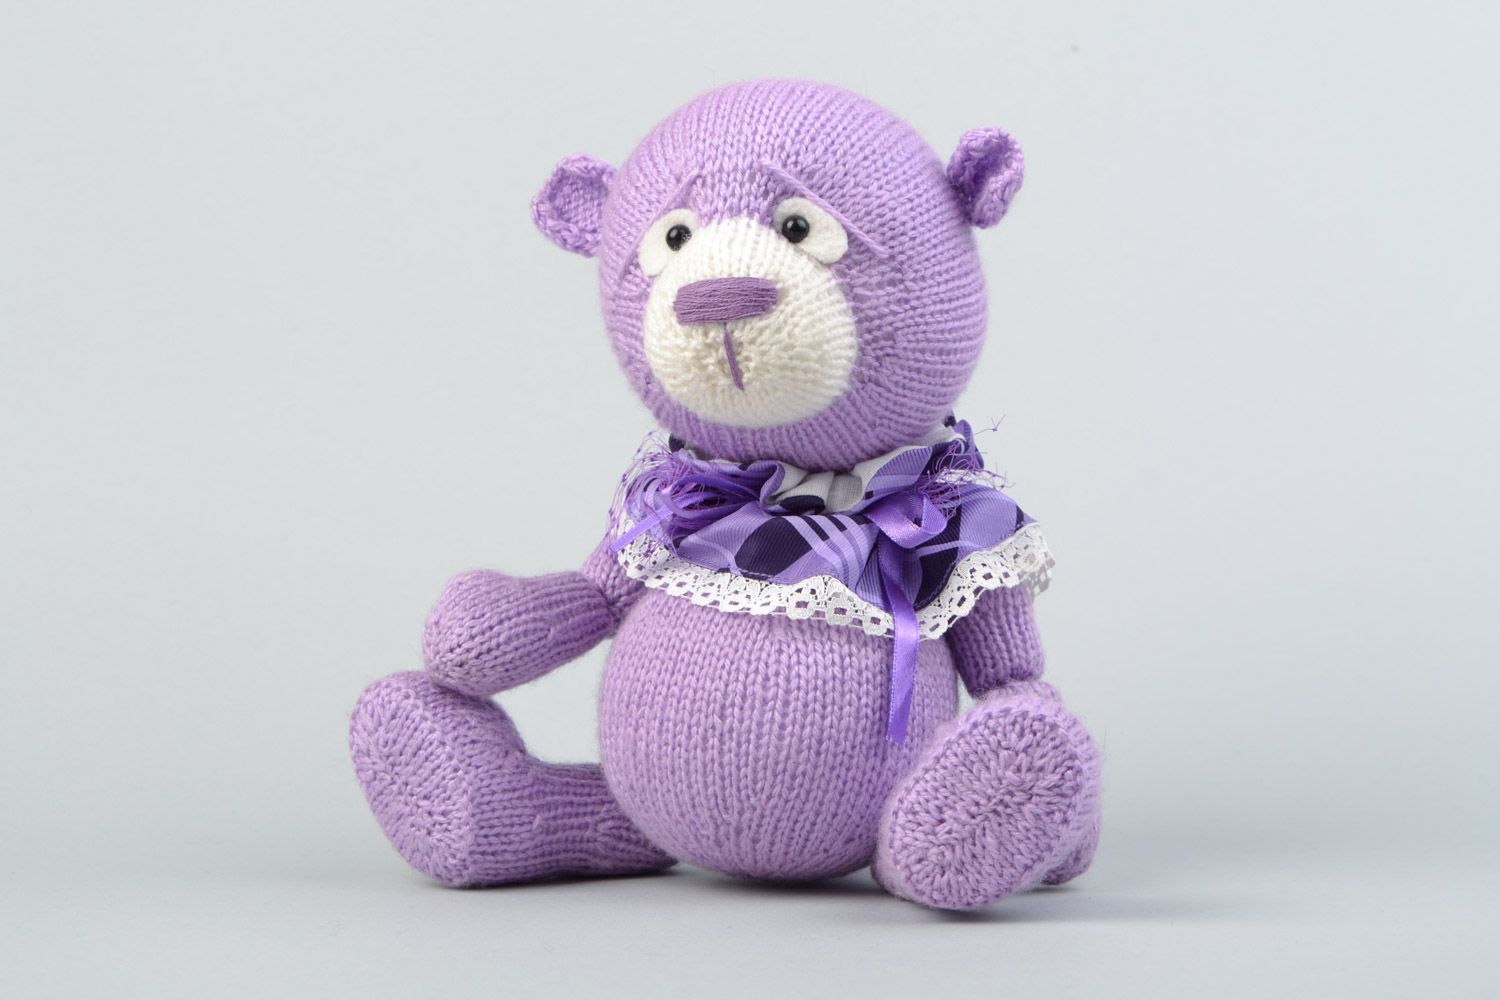 Handmade decorative crocheted purple bear toy with a bow for children photo 1